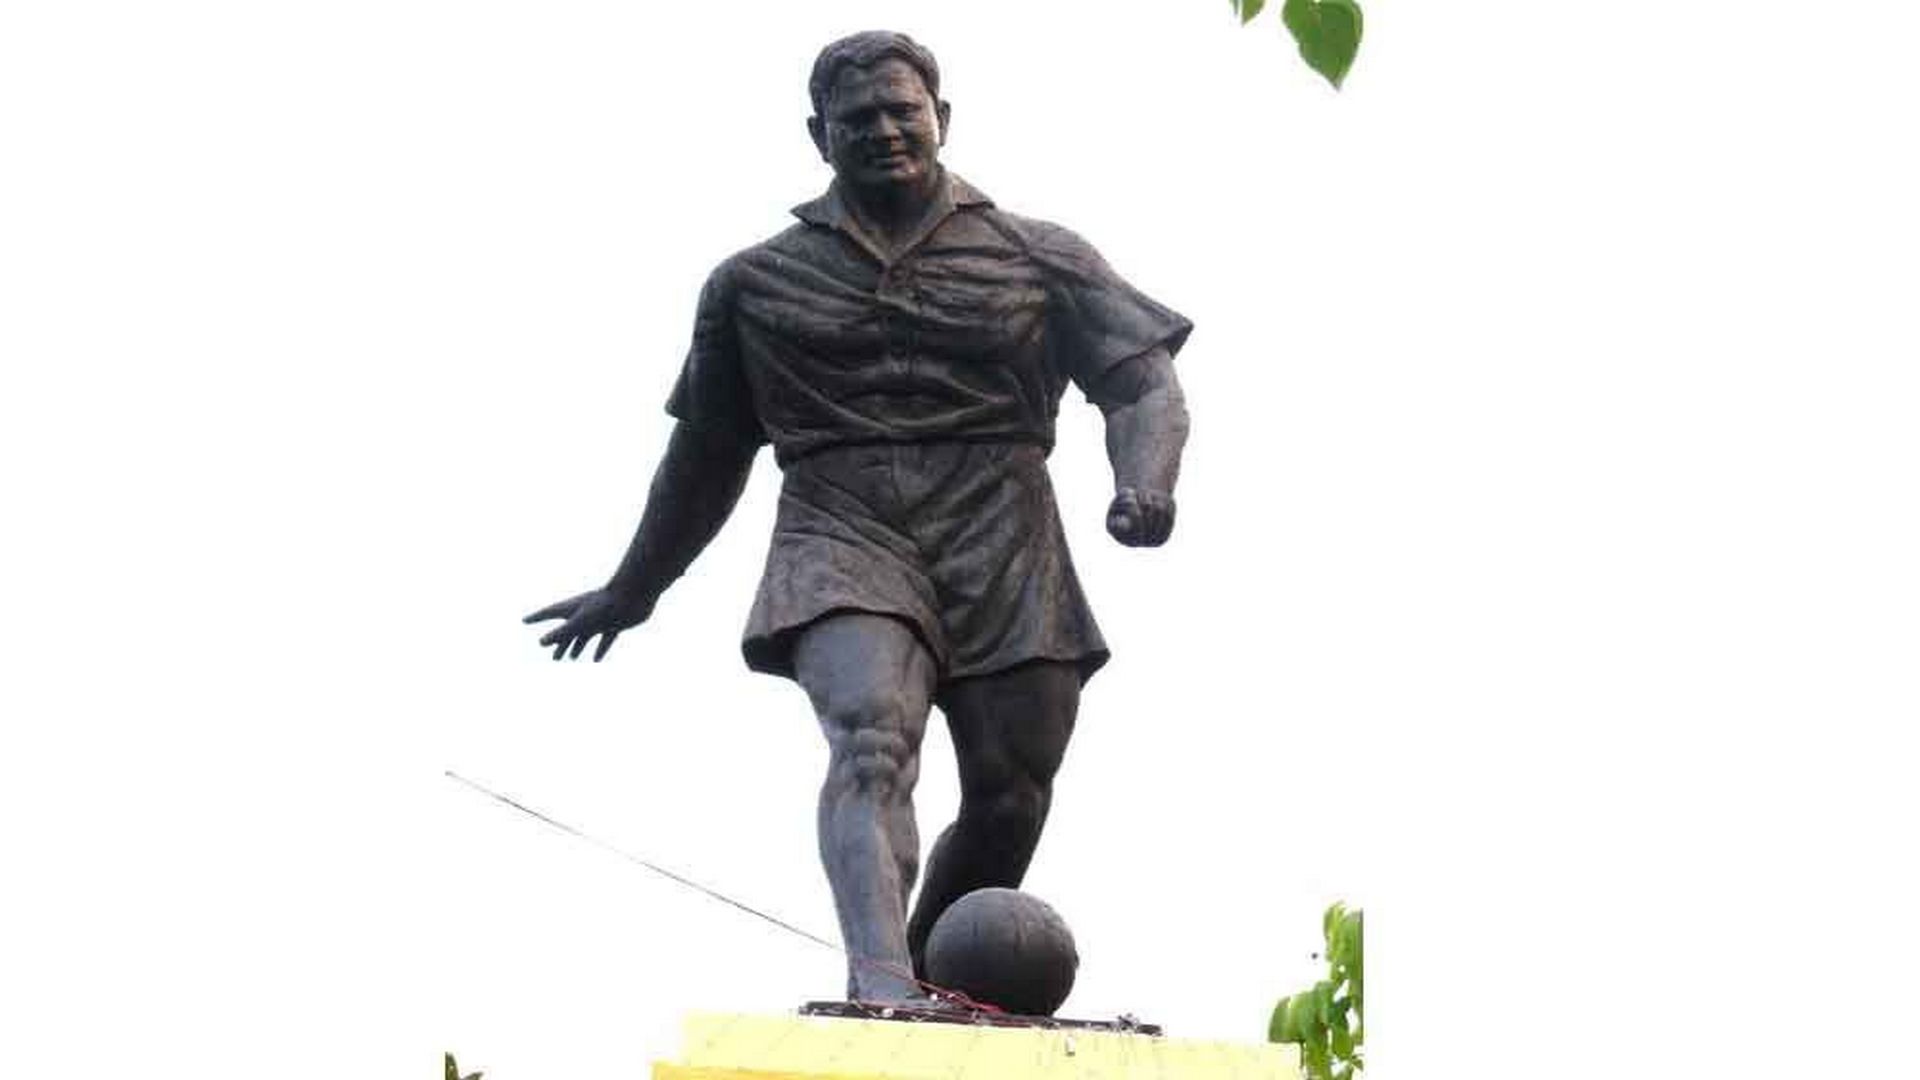 Gostha Pal - The first captain of the Indian national football team